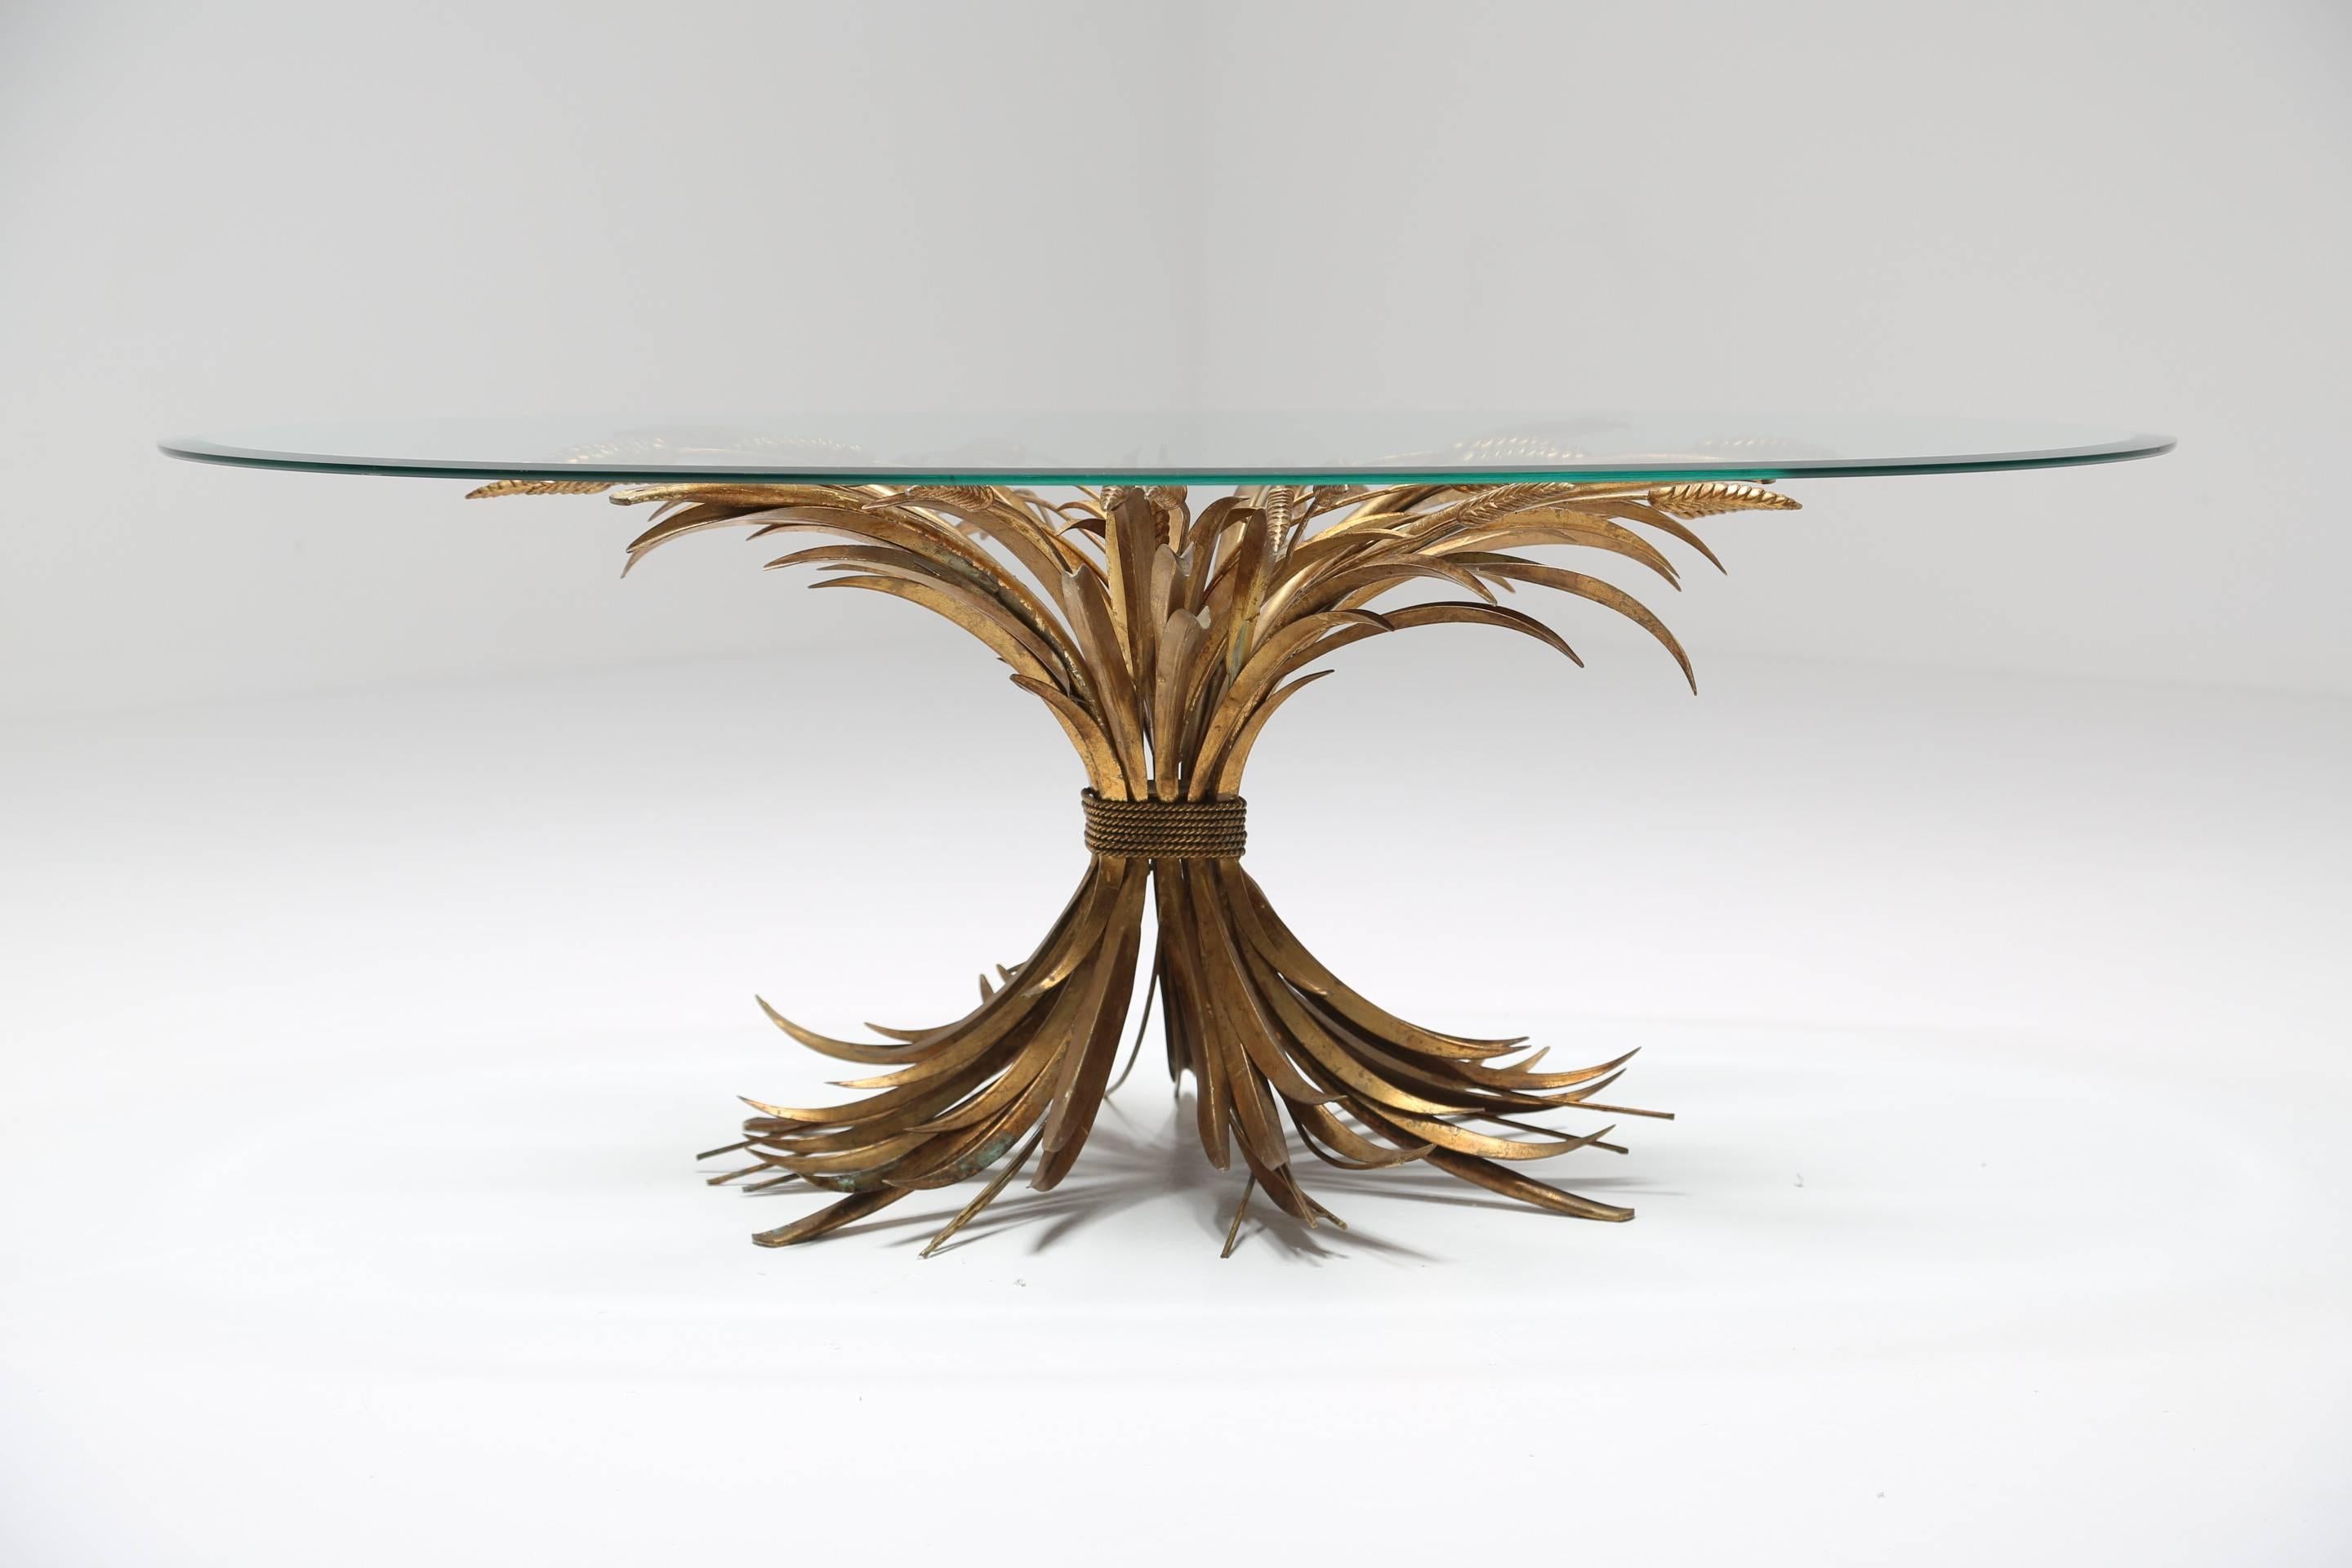 An oval glass coffee or cocktail table with a beautiful gilt iron sheaf of wheat base. This elegant Italian table designed by S. Salvadori is an iconic Mid-Century piece and unusually was designed to have an oval glass top rather than the more